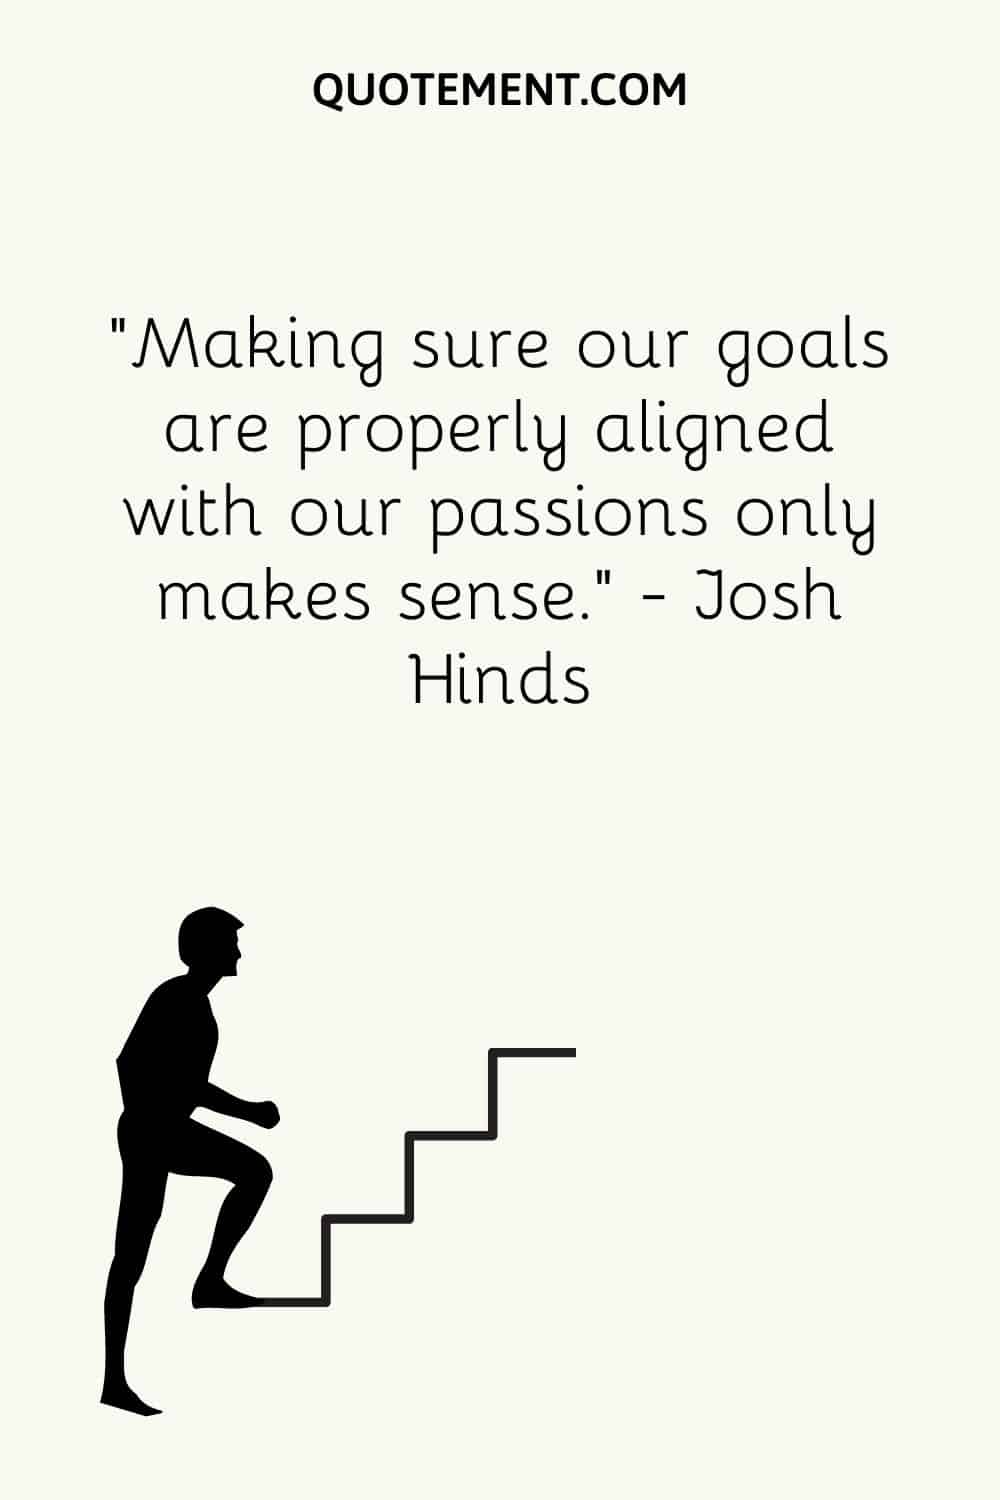 Making sure our goals are properly aligned with our passions only makes sense